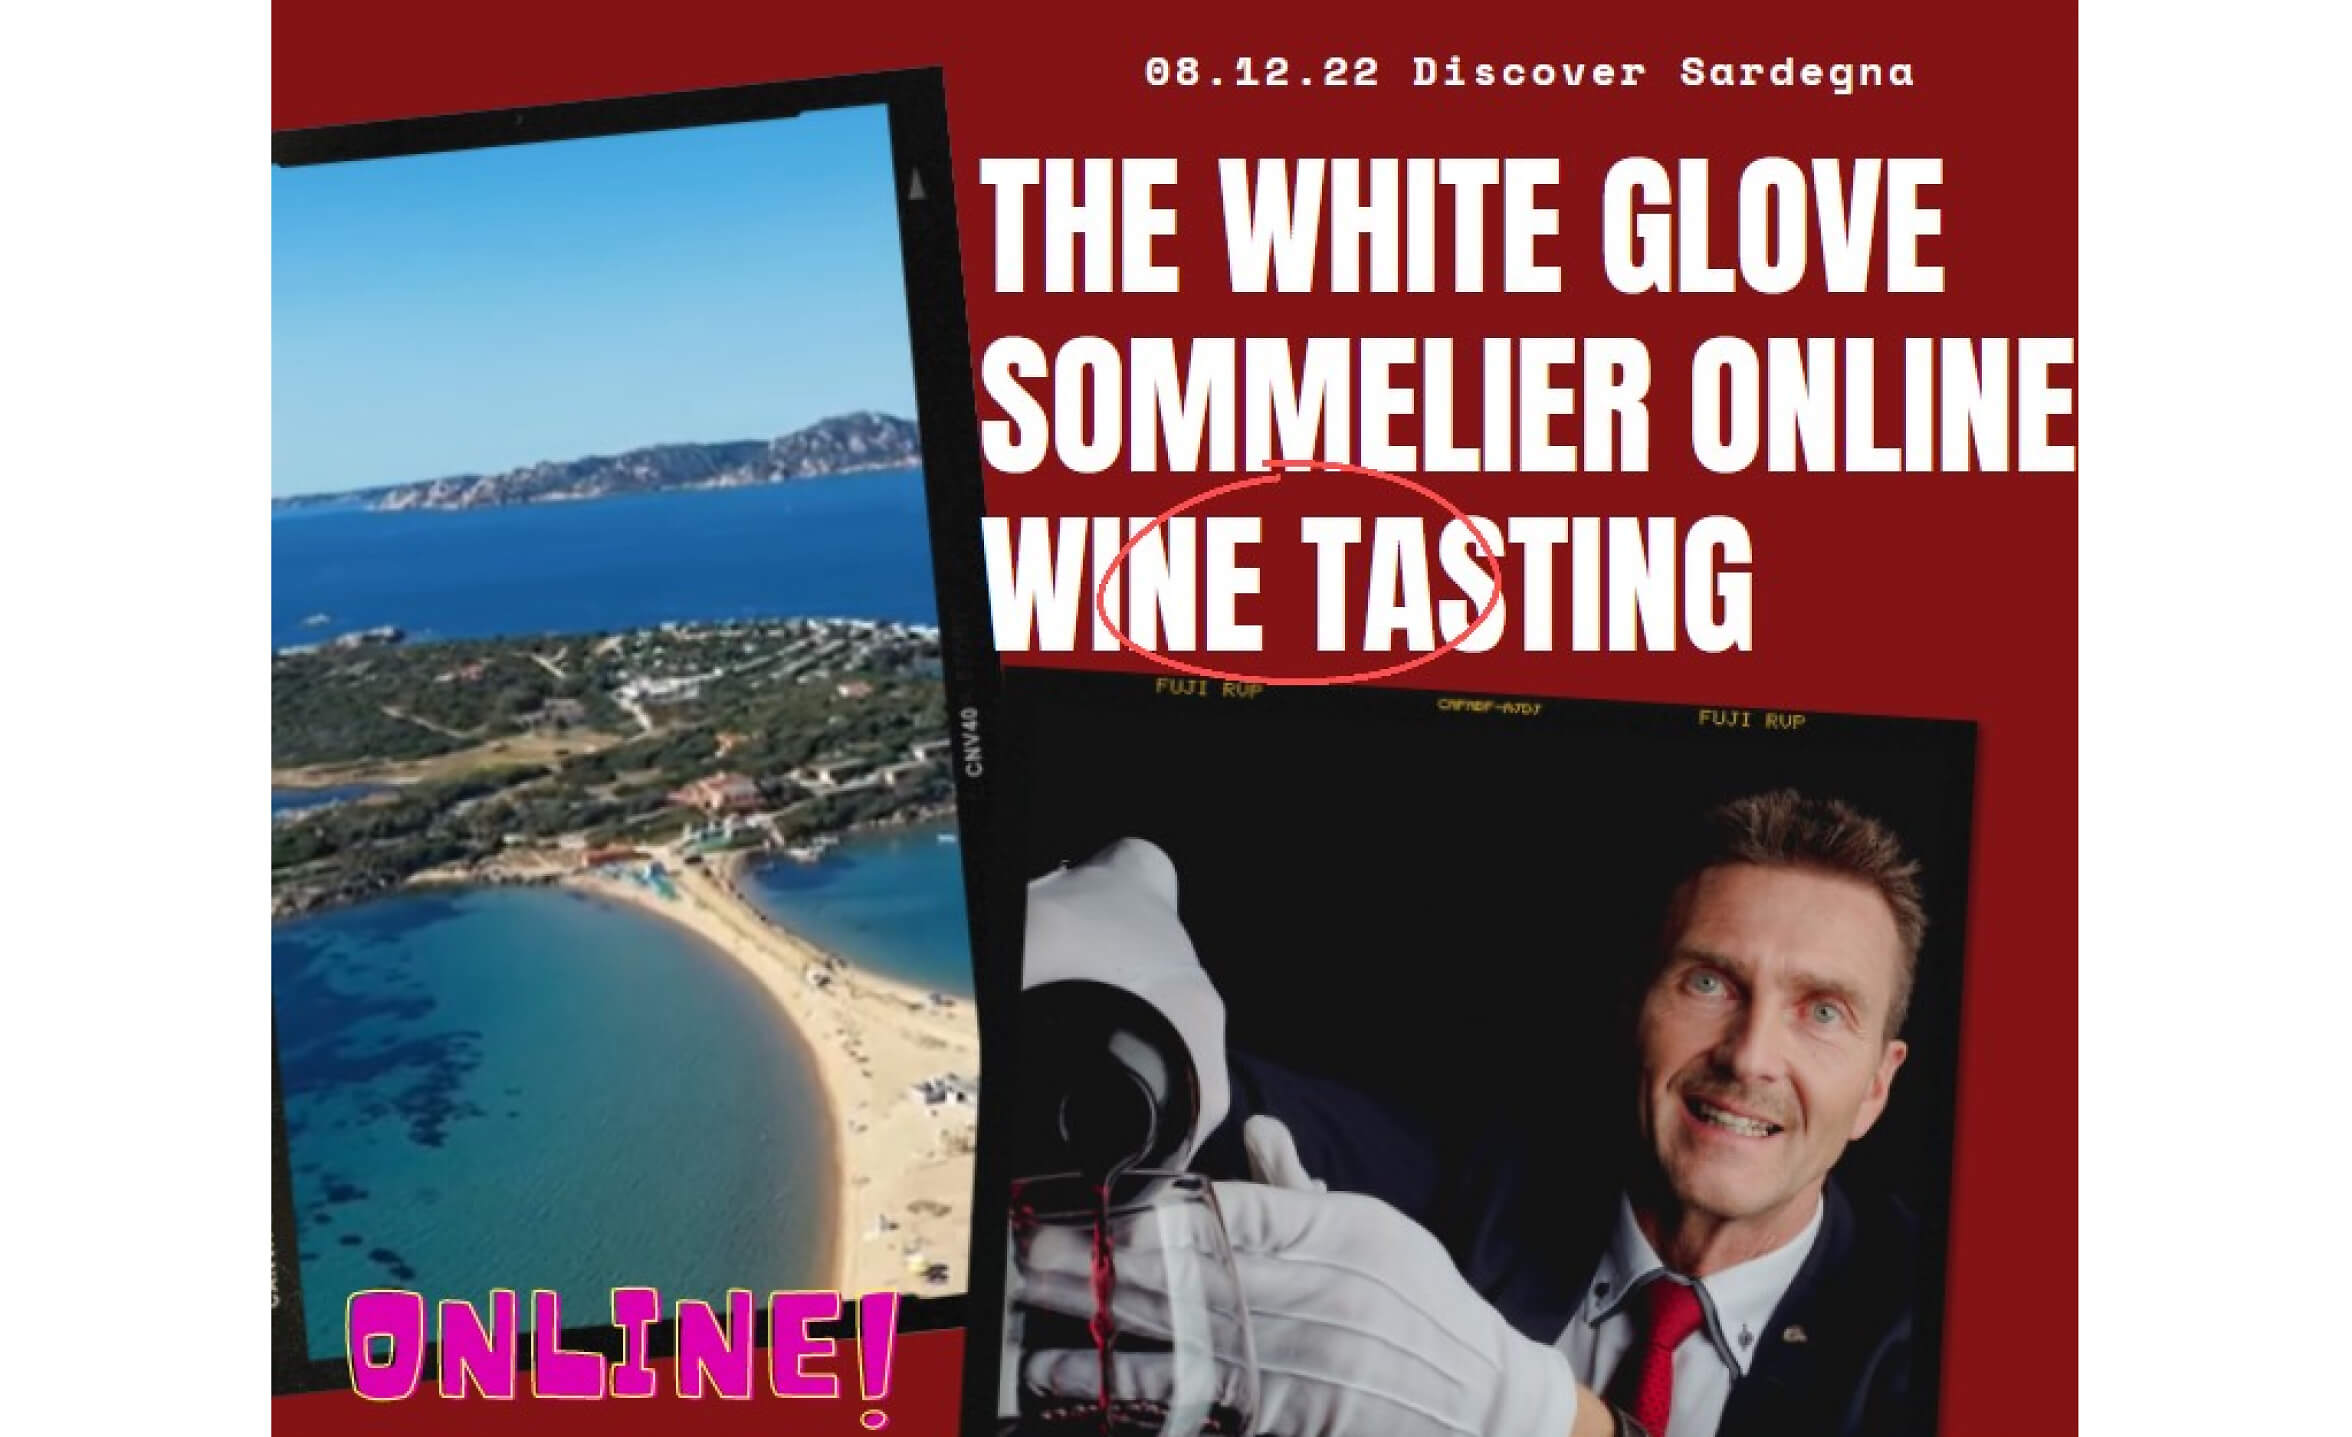 Event-Image for 'Online Wine Tasting Sardegna with the White Glove Sommelier'